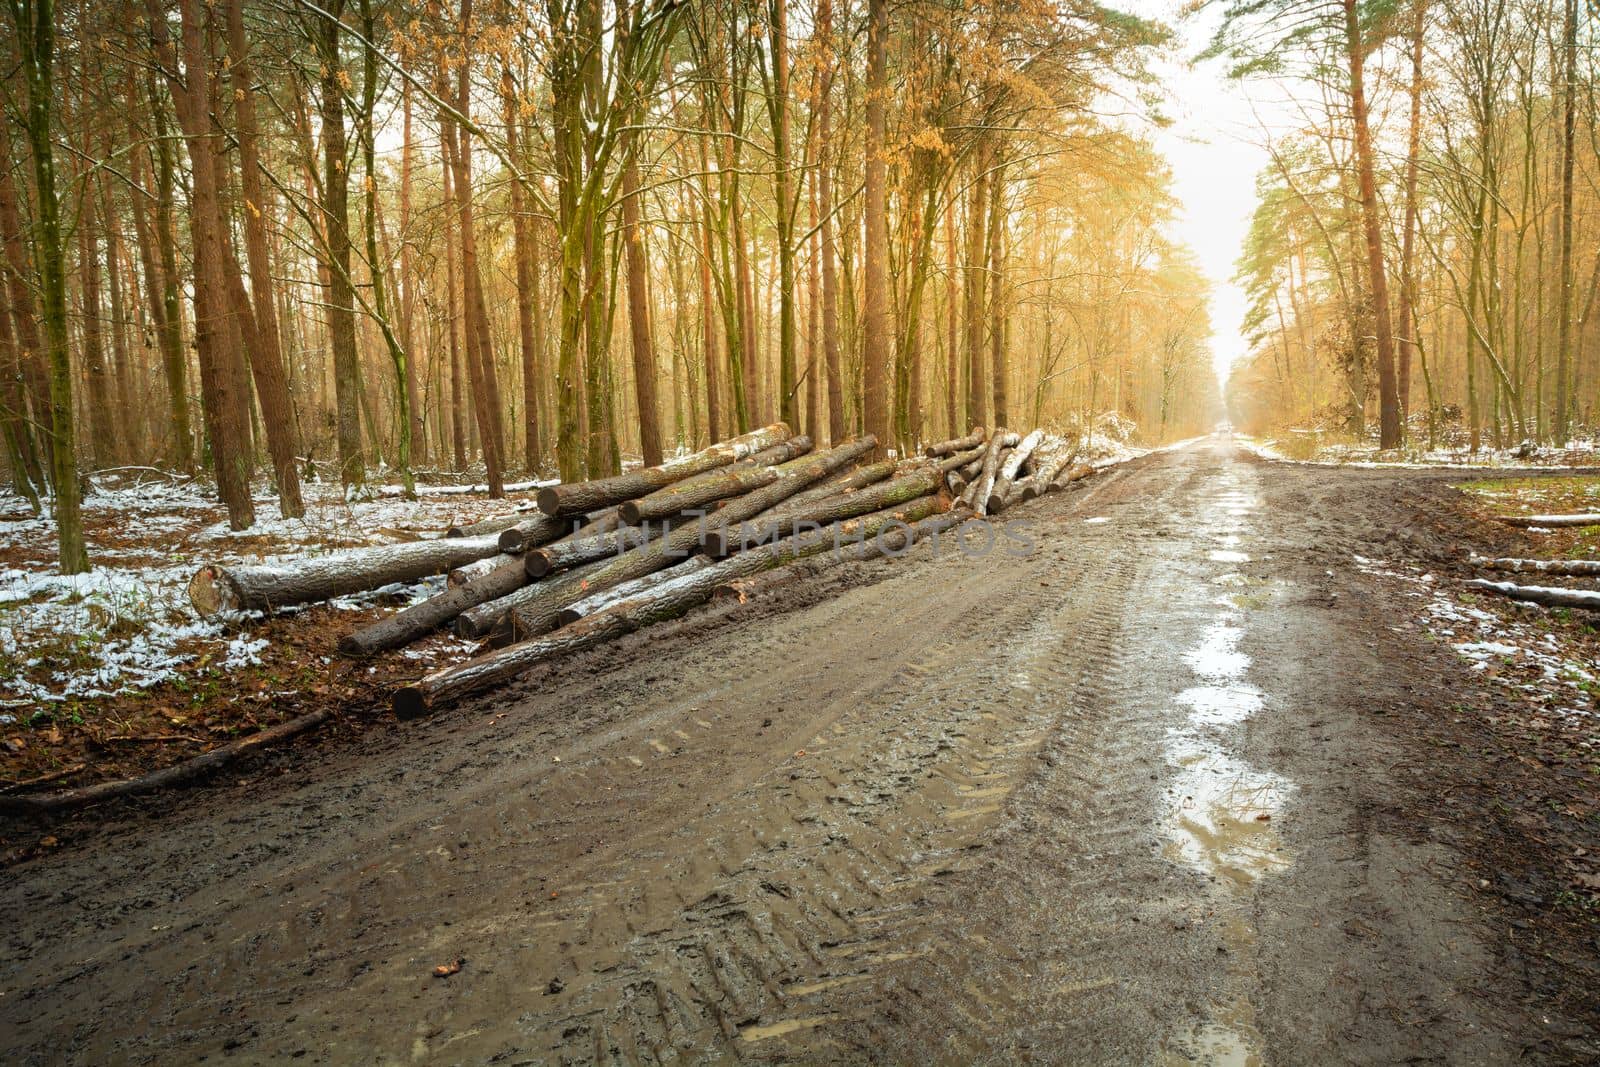 Muddy road in the forest with felled trees, autumn day, eastern Poland